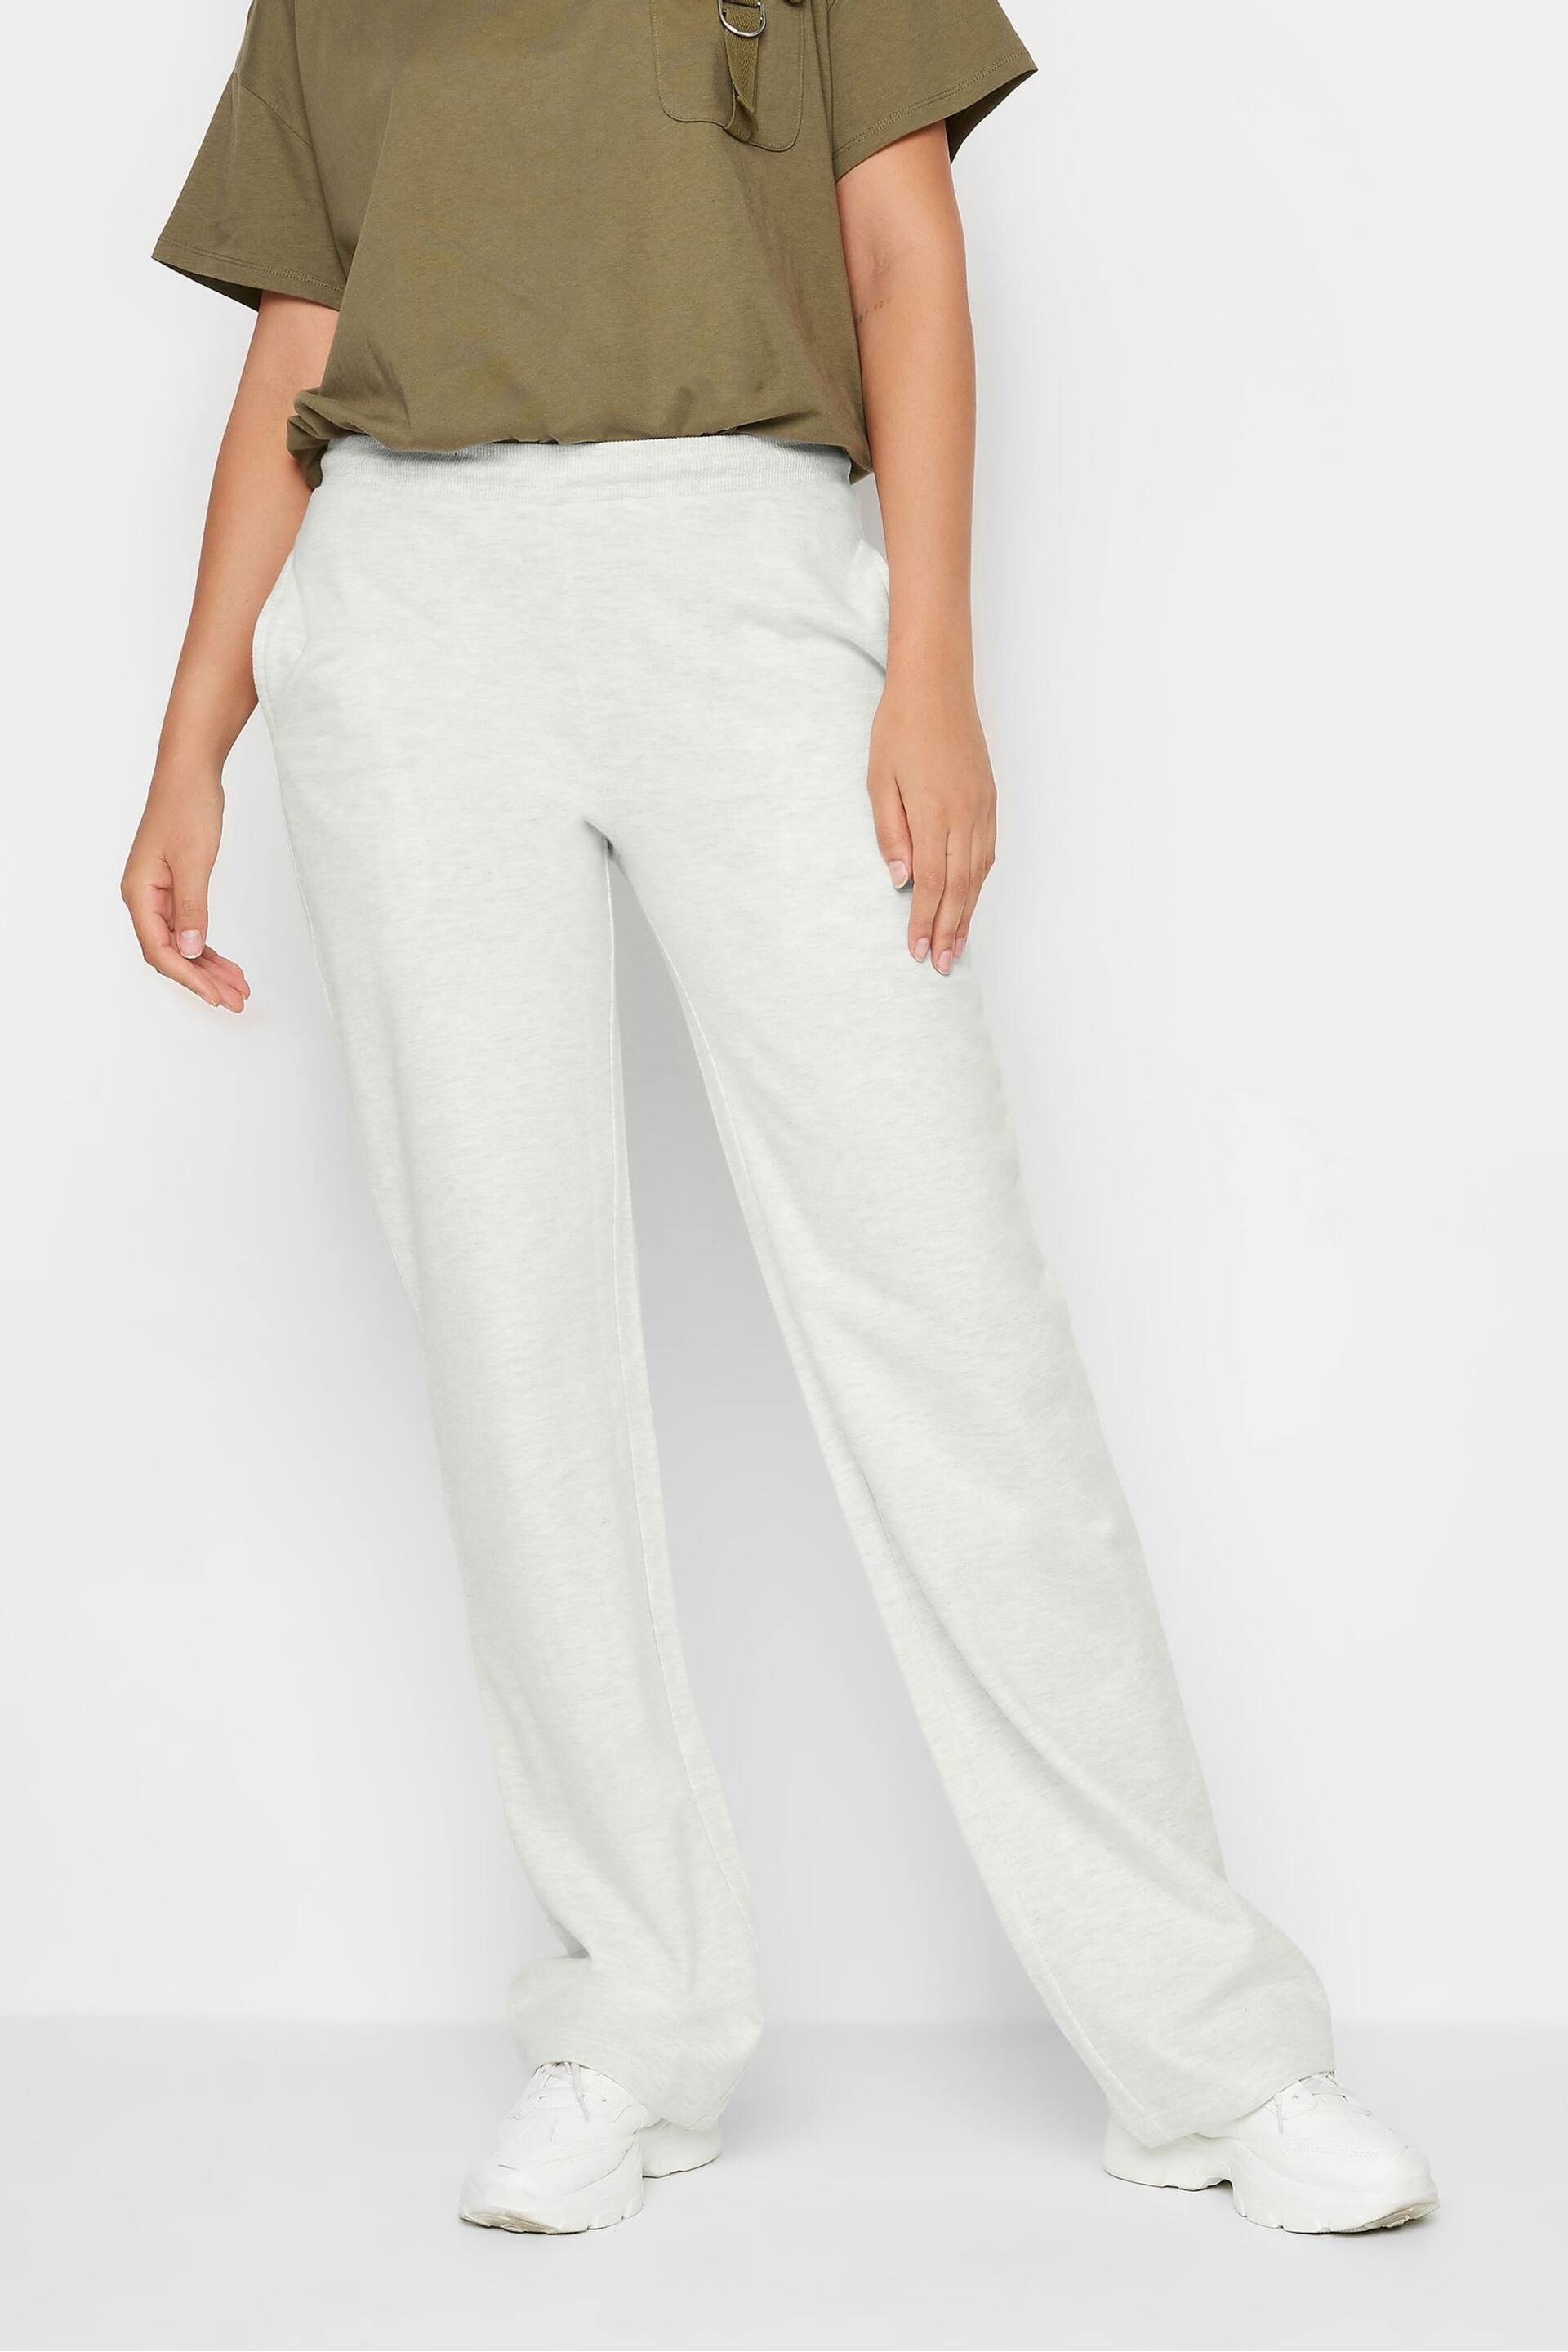 Long Tall Sally White Wide Leg Joggers - Image 1 of 4